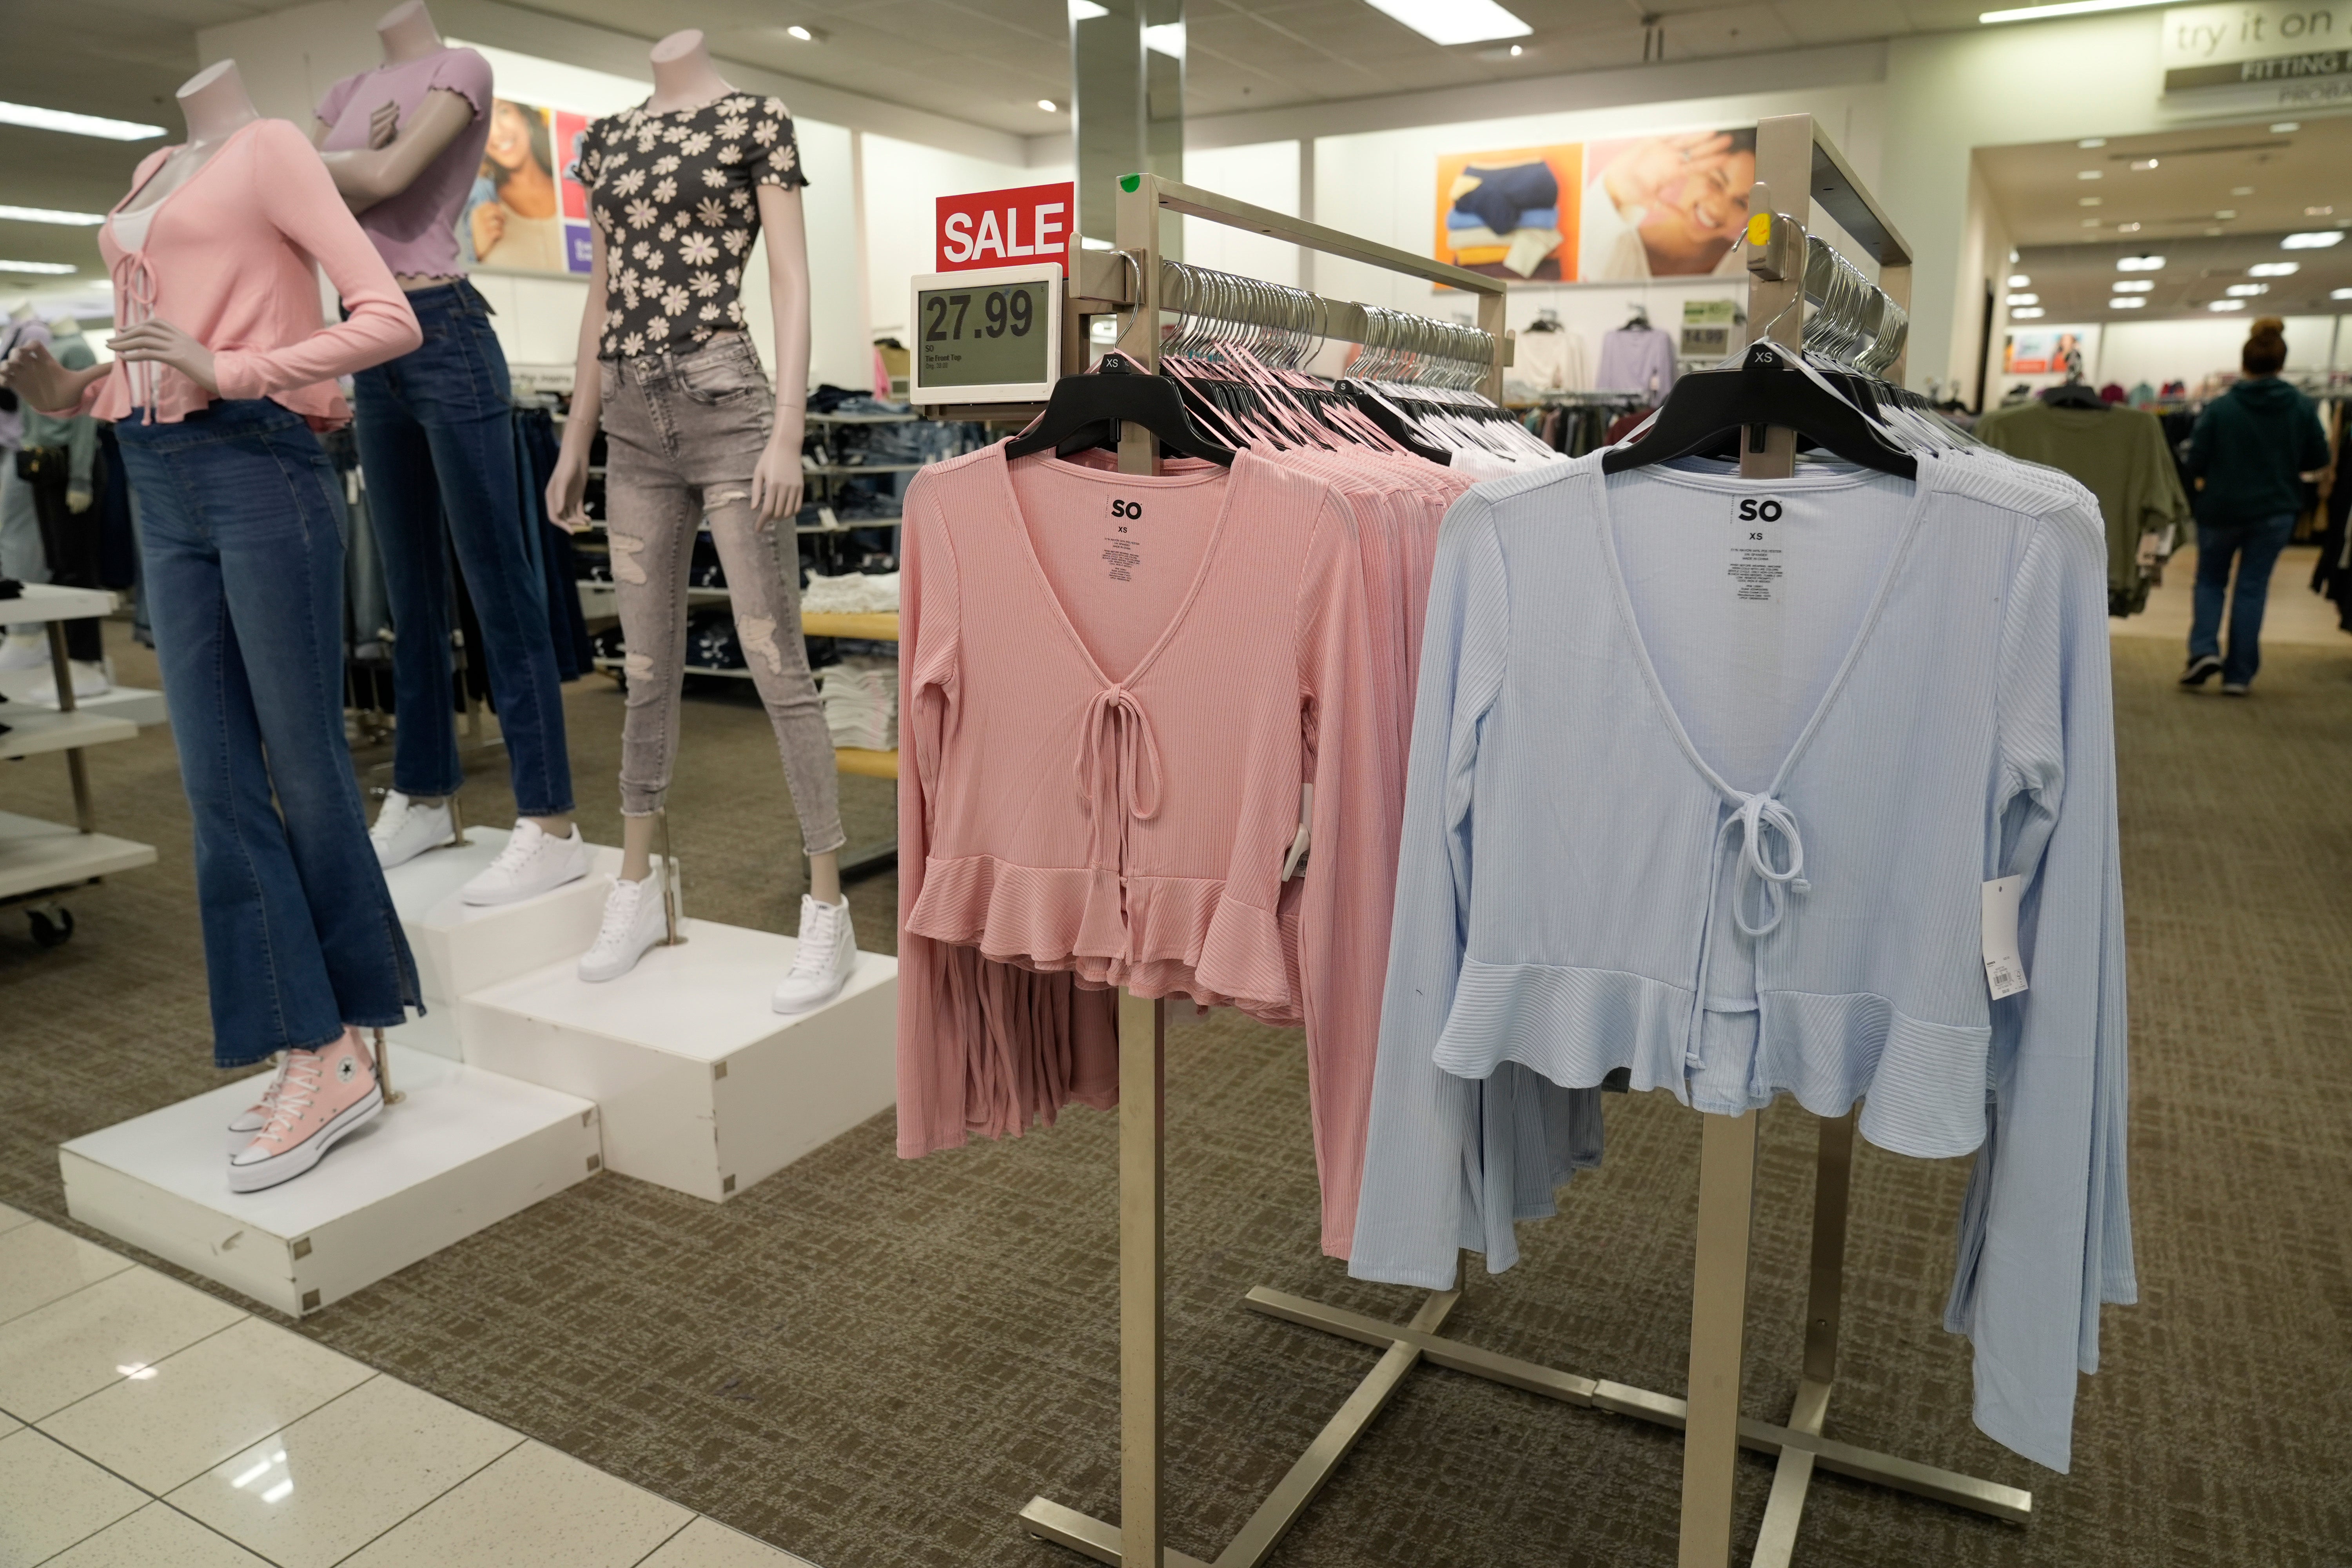 Clothing is displayed at a Kohl’s store in Clifton, N.J